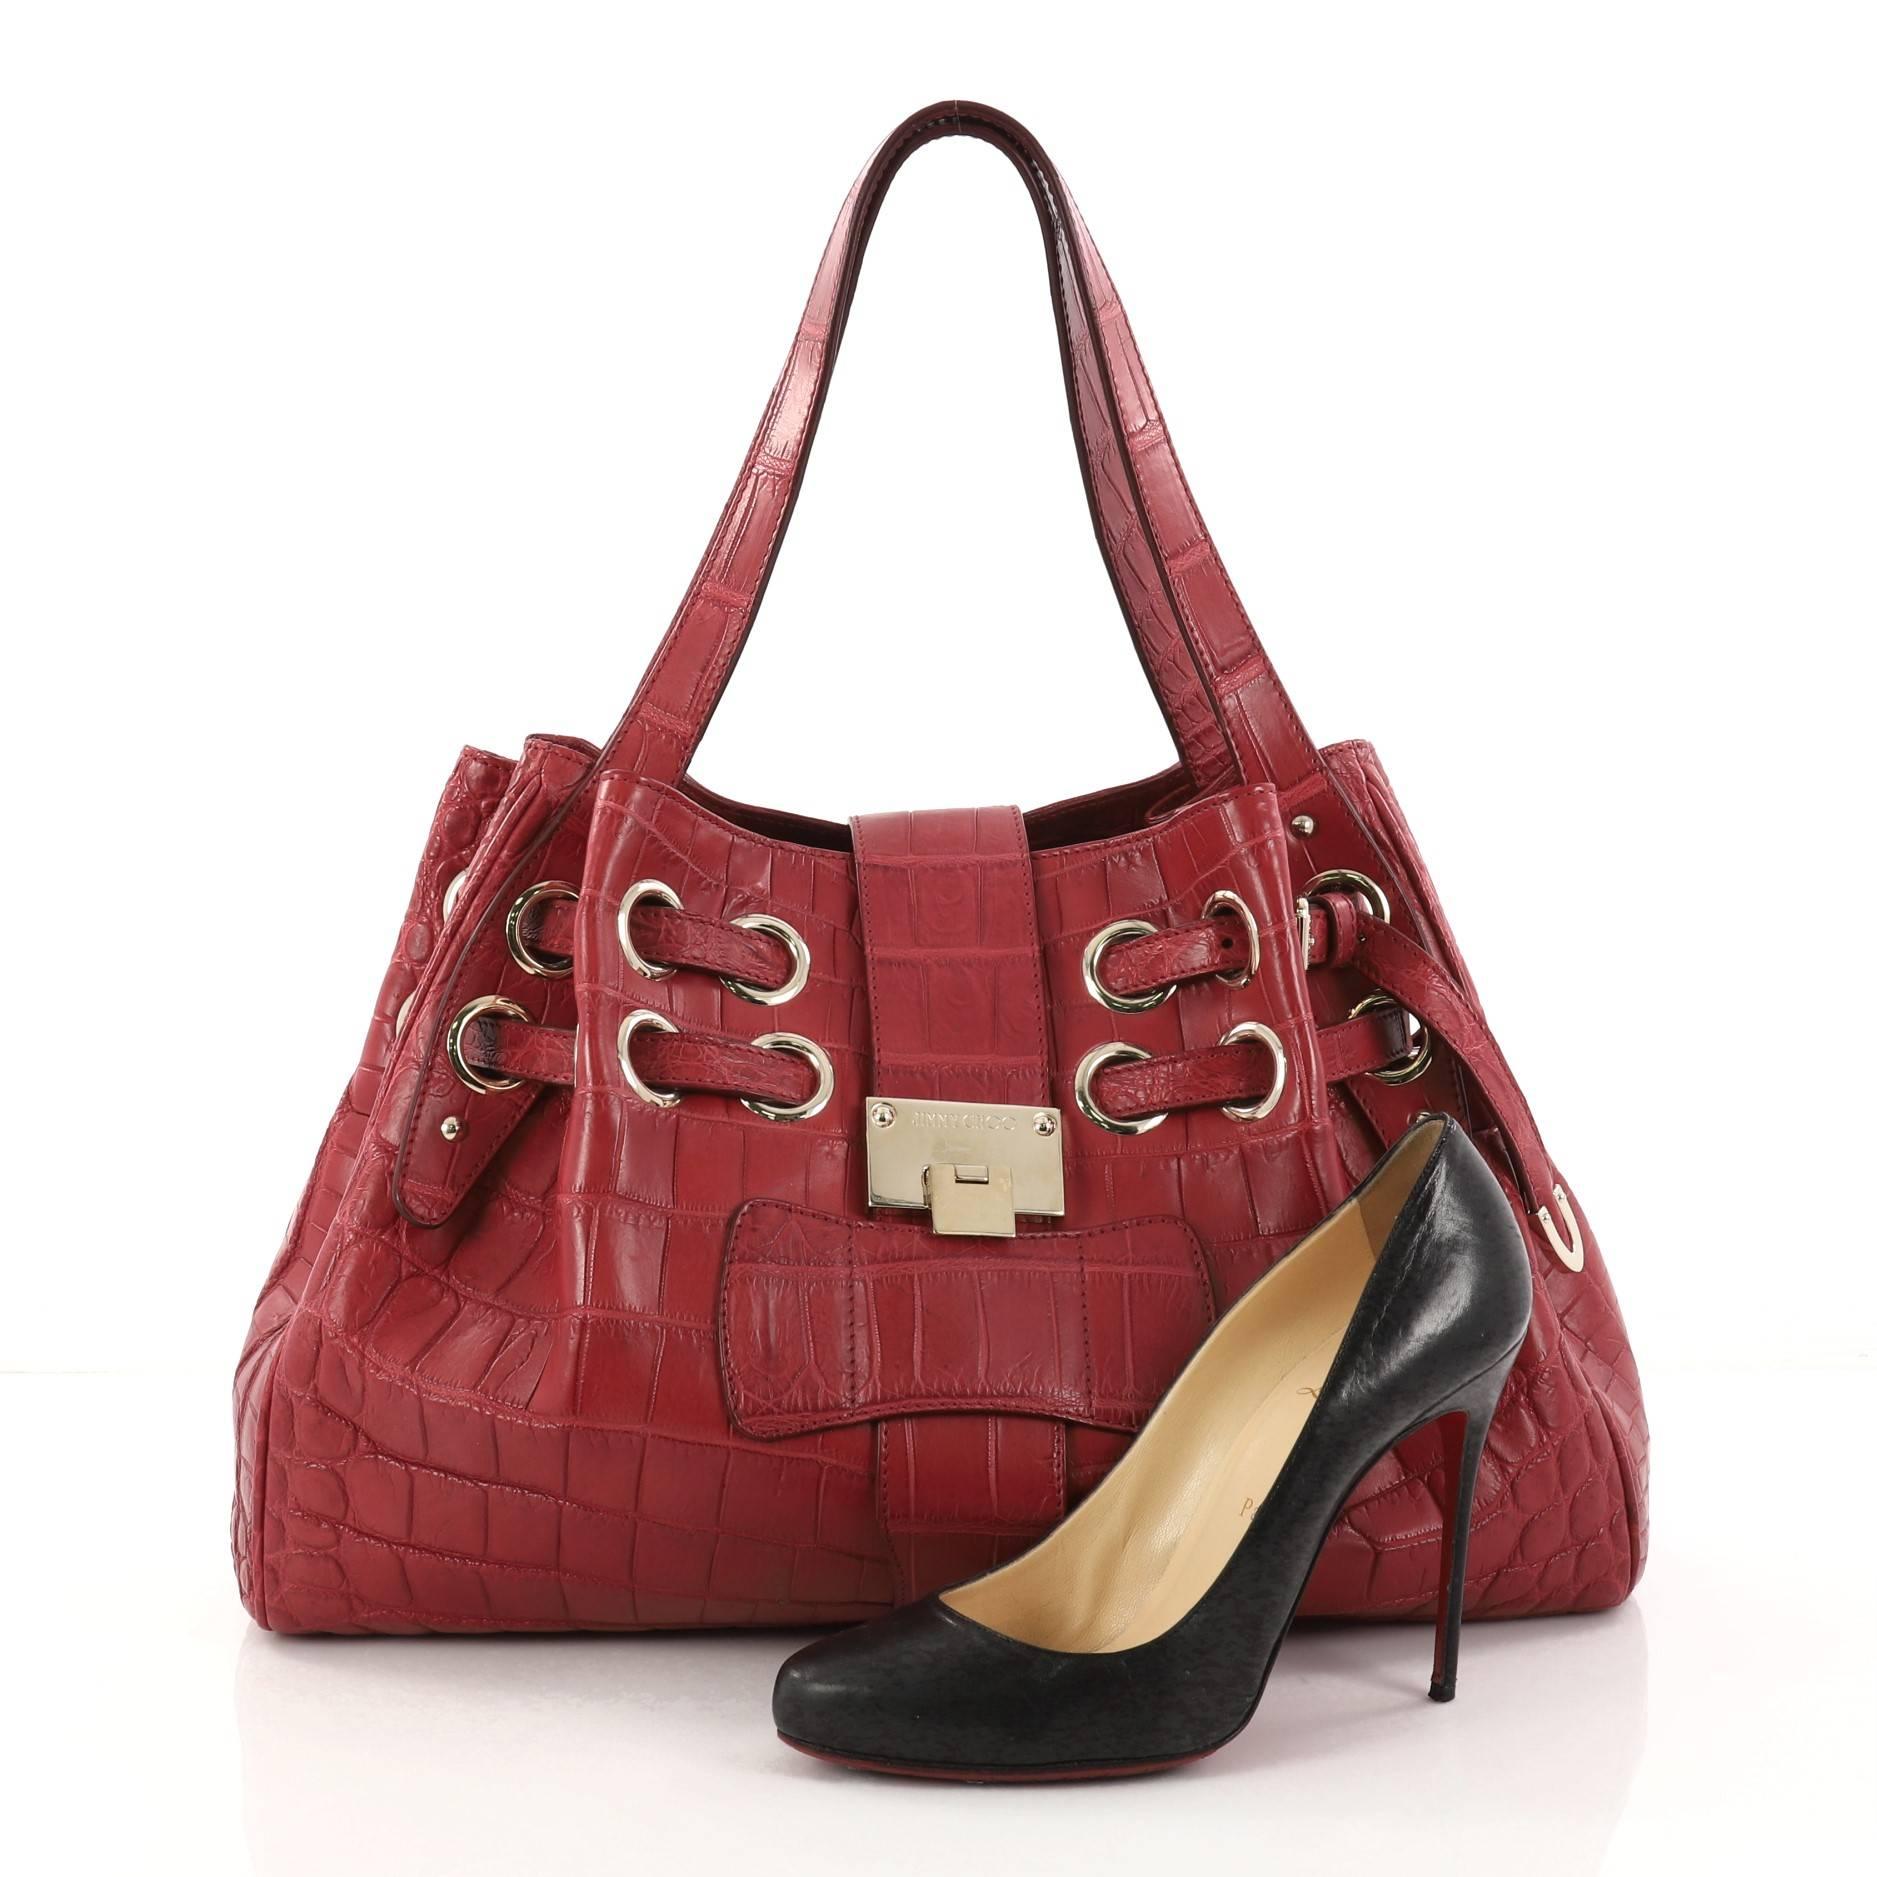 This authentic Jimmy Choo Ramona Hobo Crocodile is sophisticated and easy-to-carry made for everyday excursions. Constructed from red genuine crocodile skin, this hobo features multiple wrapped slim straps laced through metal eyelets, dual flat top